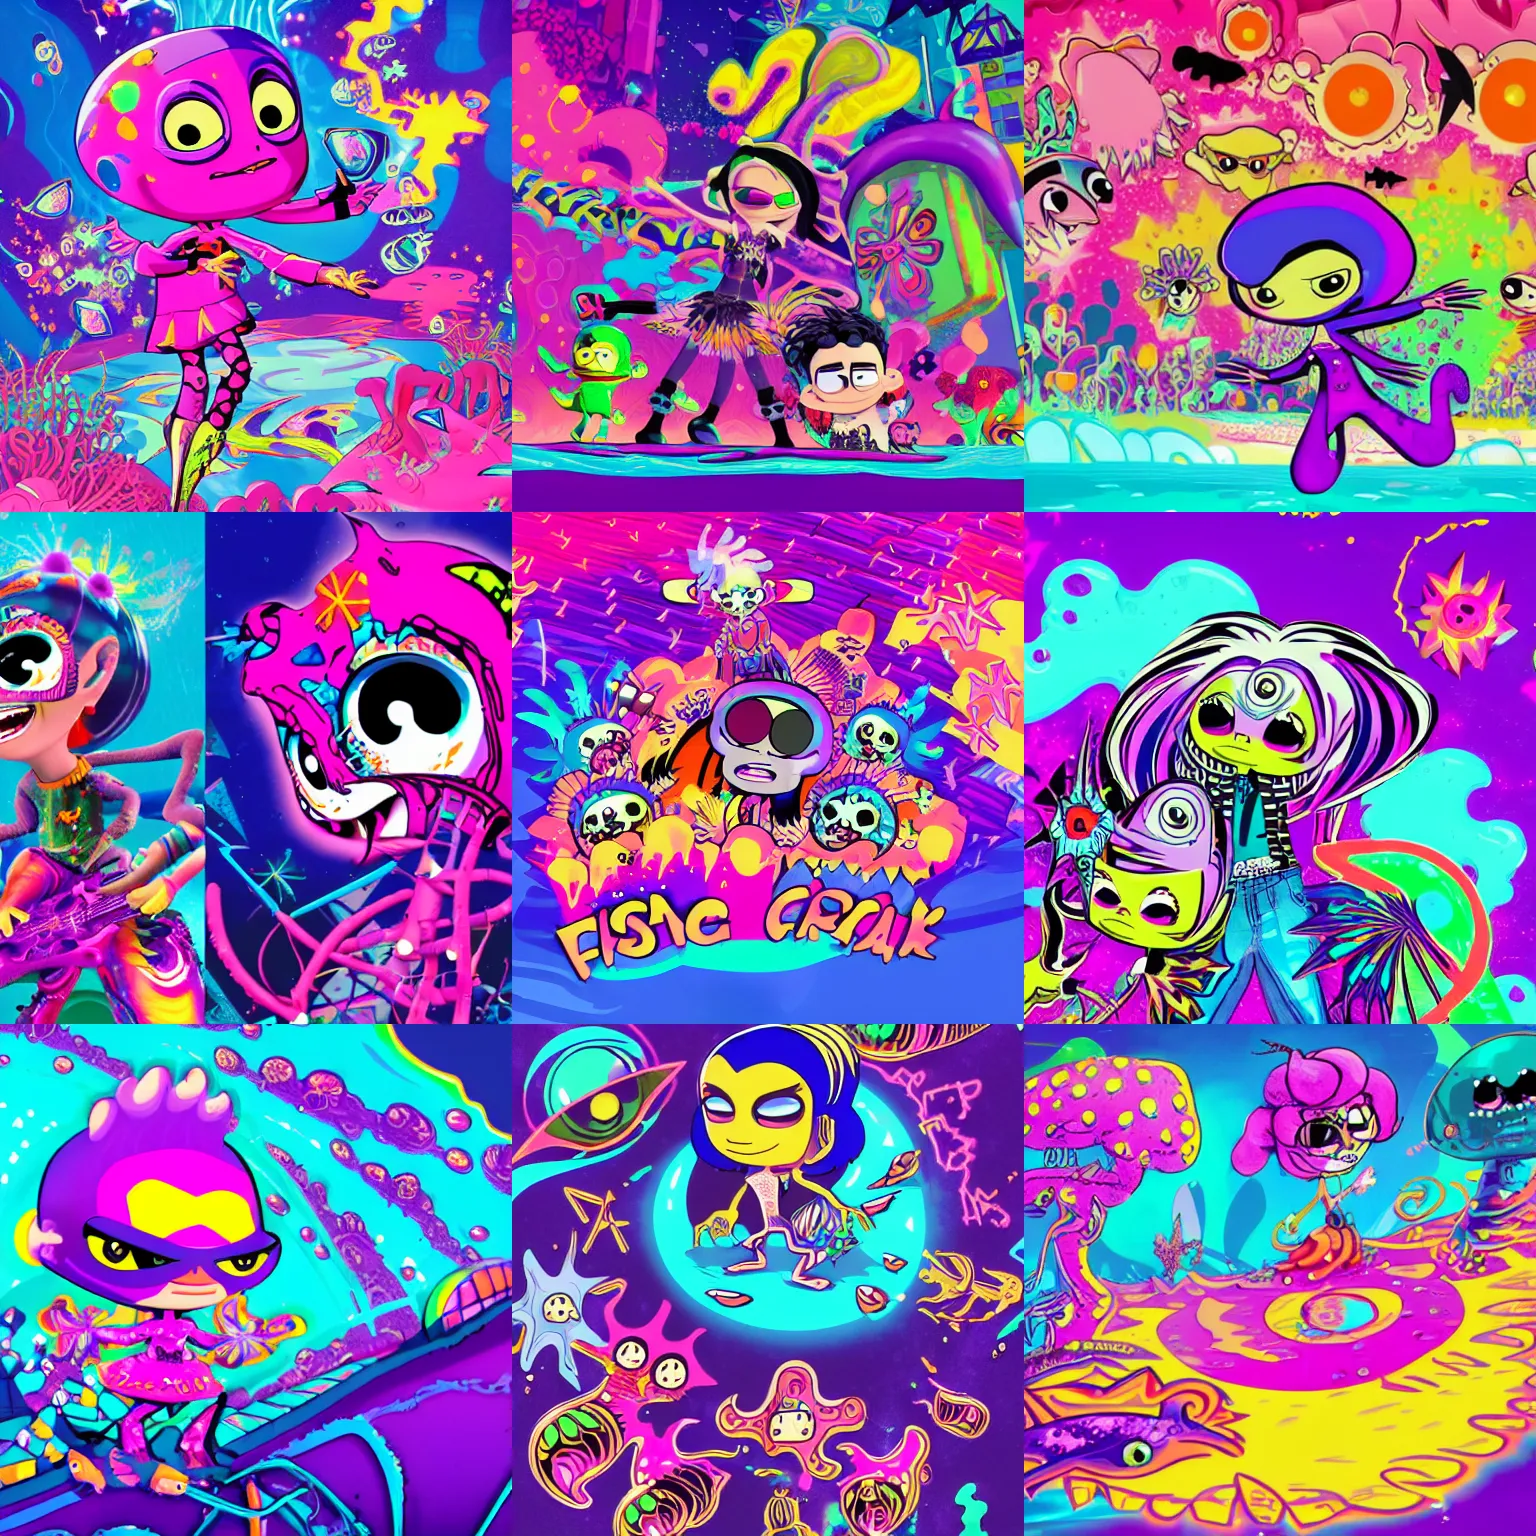 Prompt: lisa frank psychic punk rocker vampiric electrifying rockstar background designs of vibrant underwater locations filled with fish and coral by genndy tartakovsky and splatoon by nintendo and the psychonauts franchise by doublefine tim shafer artists and the creators of fret nice at pieces interactive for the new hotel transylvania film